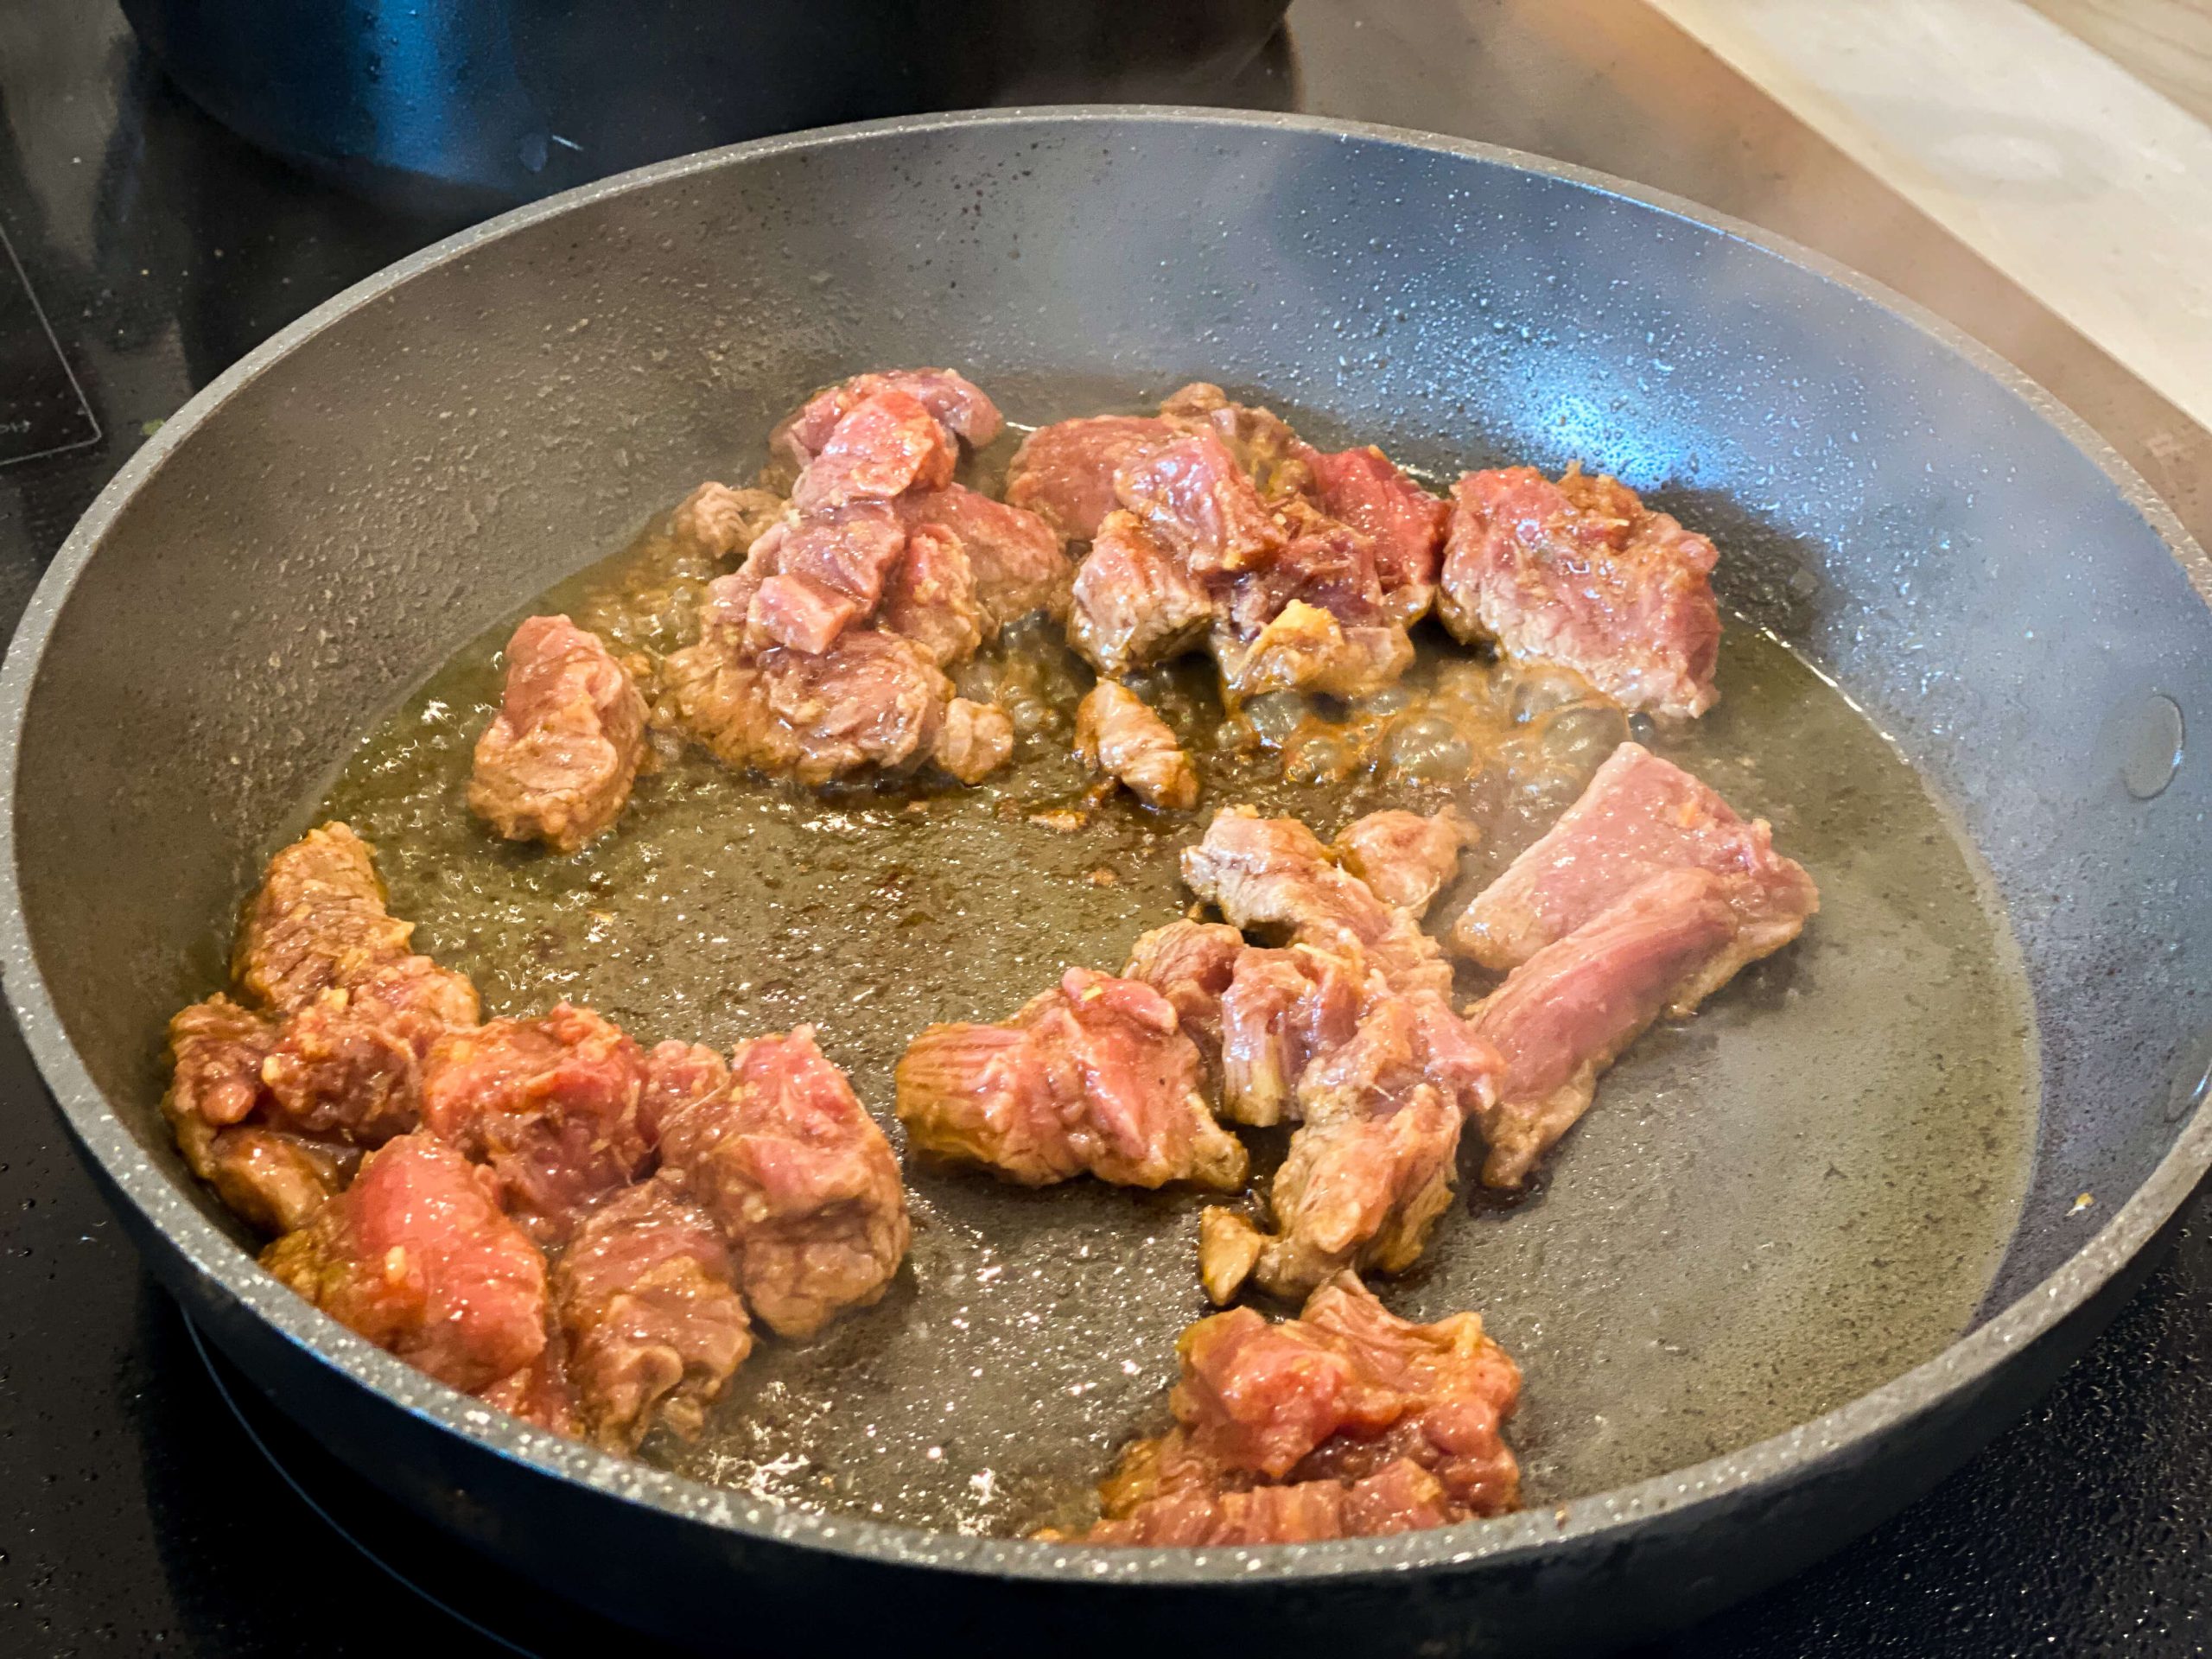 Meat cooking in batches 